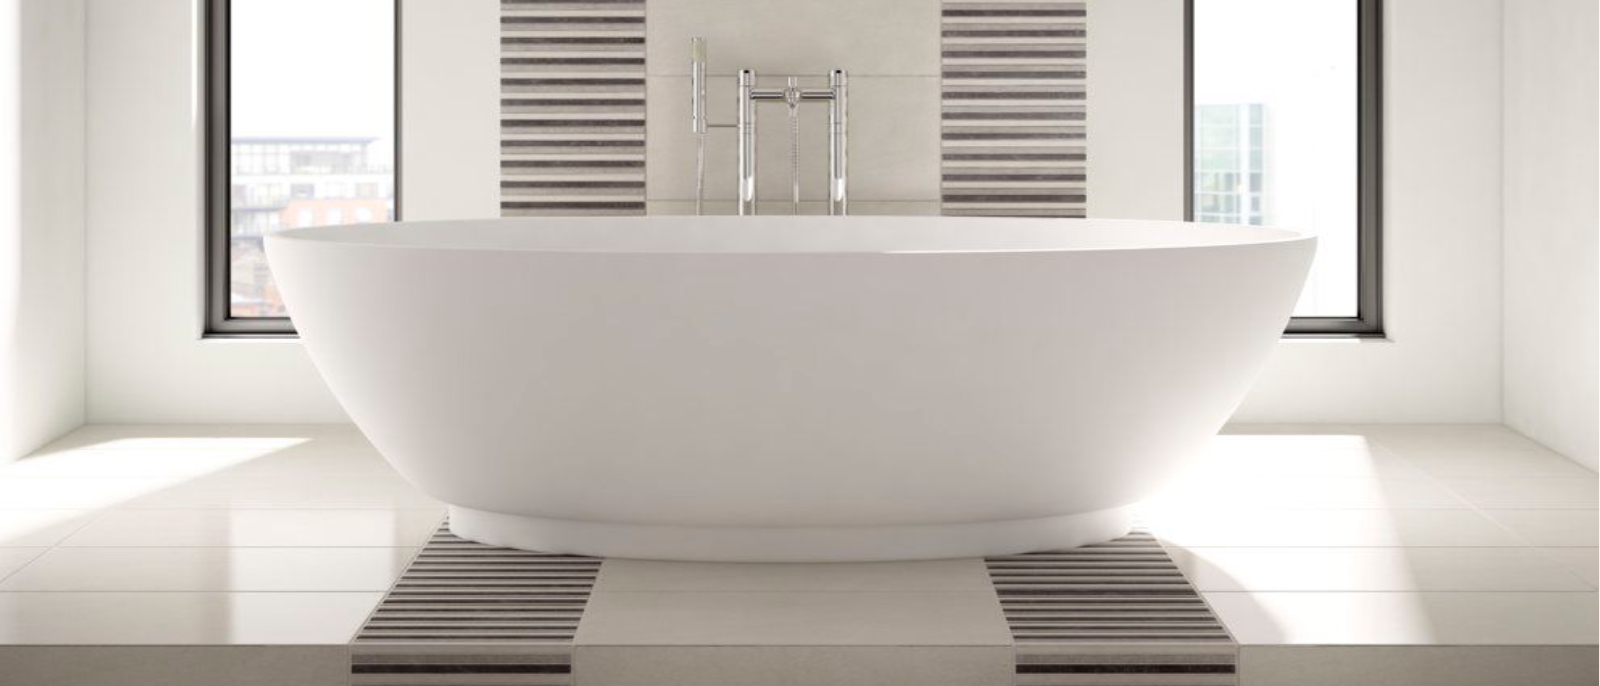 EastLincs Bathrooms, adding a touch of glamour to all homes